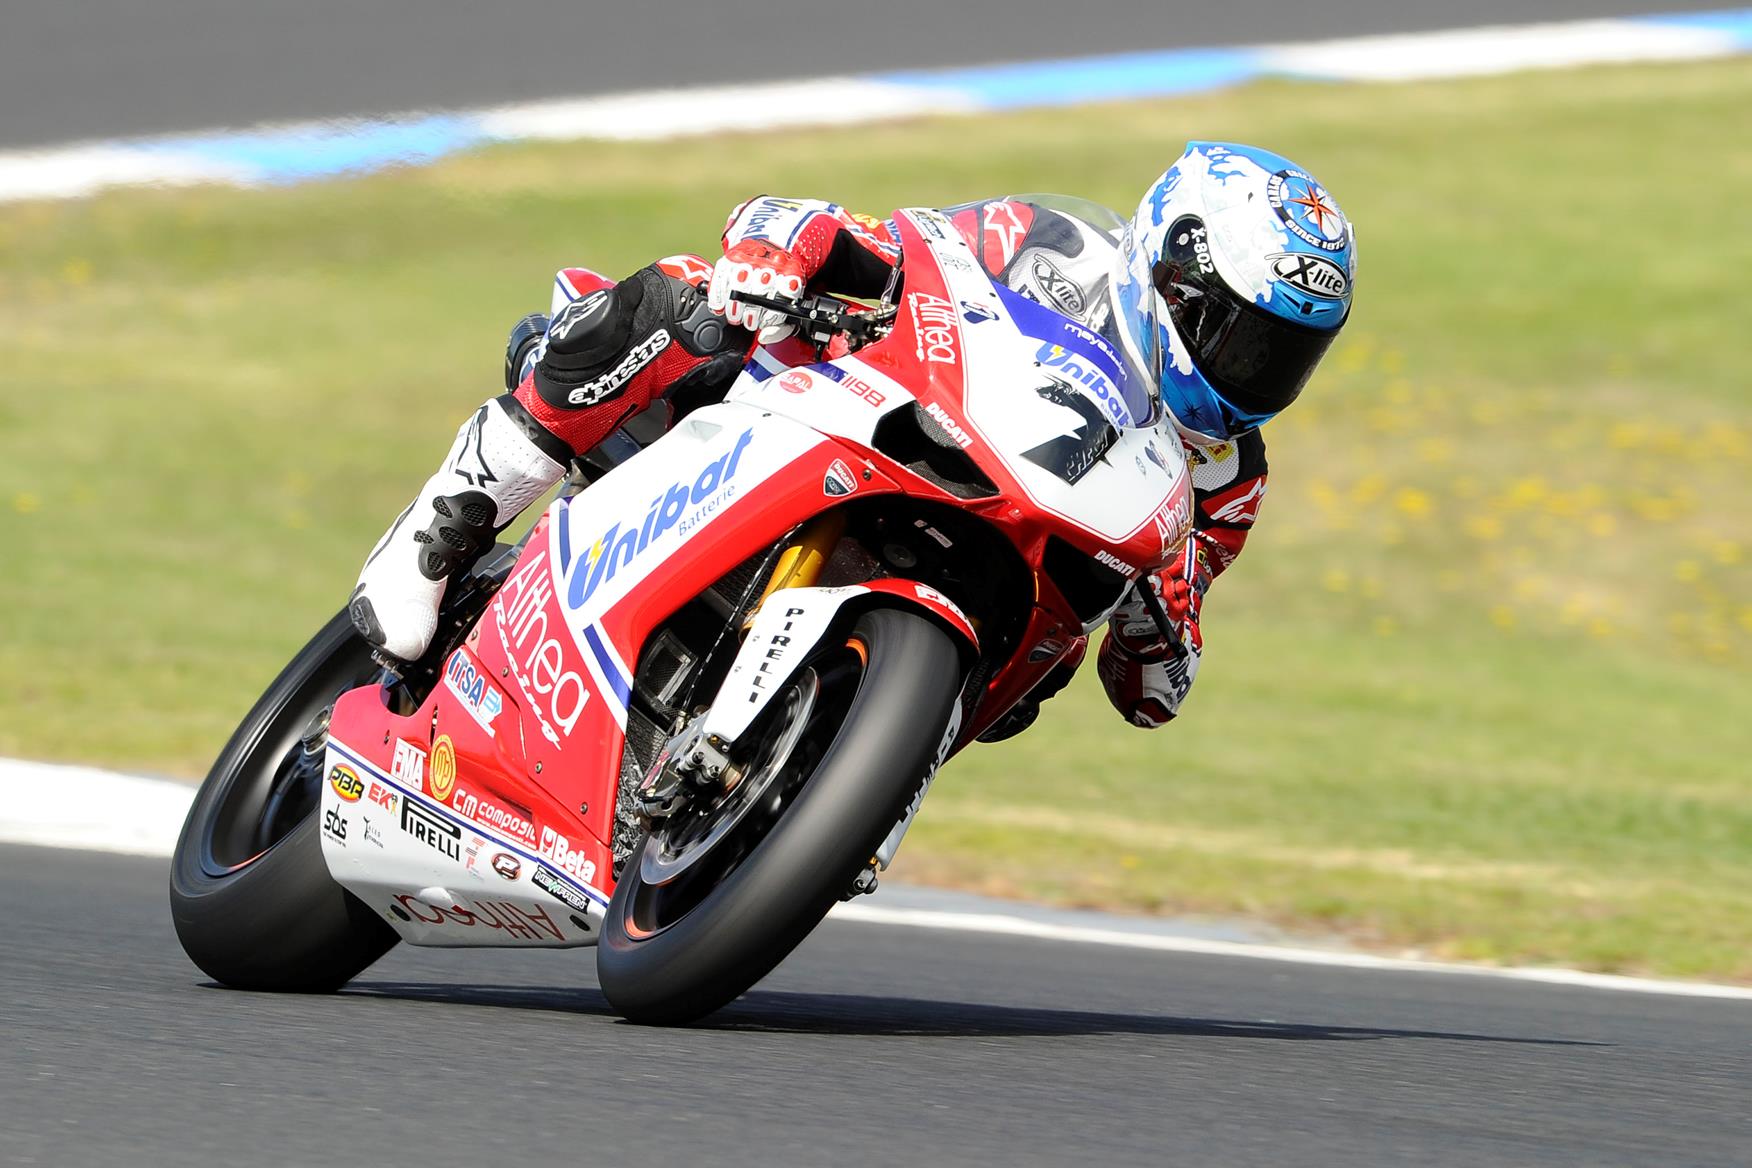 Phillip Island WSB: Checa takes race one victory1752 x 1168